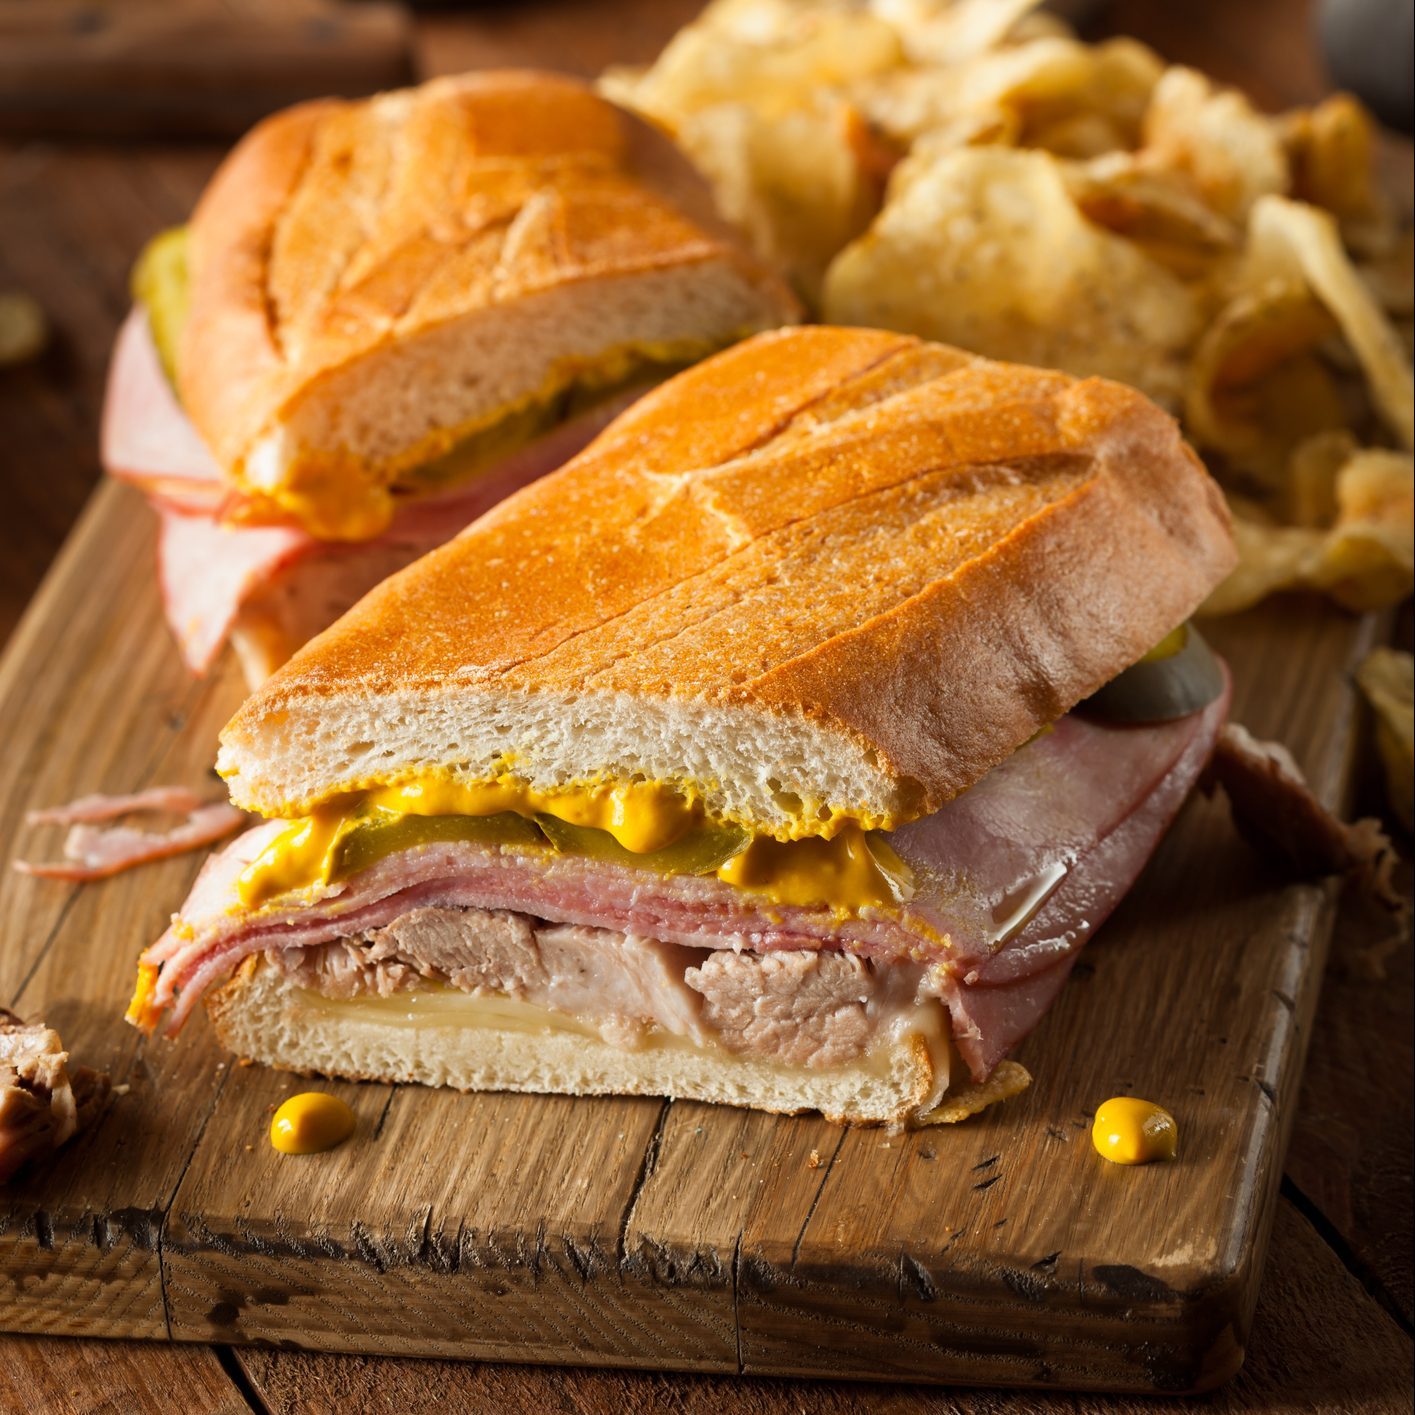 Homemade Traditional Cuban Sandwiches with Ham Pork and Cheese